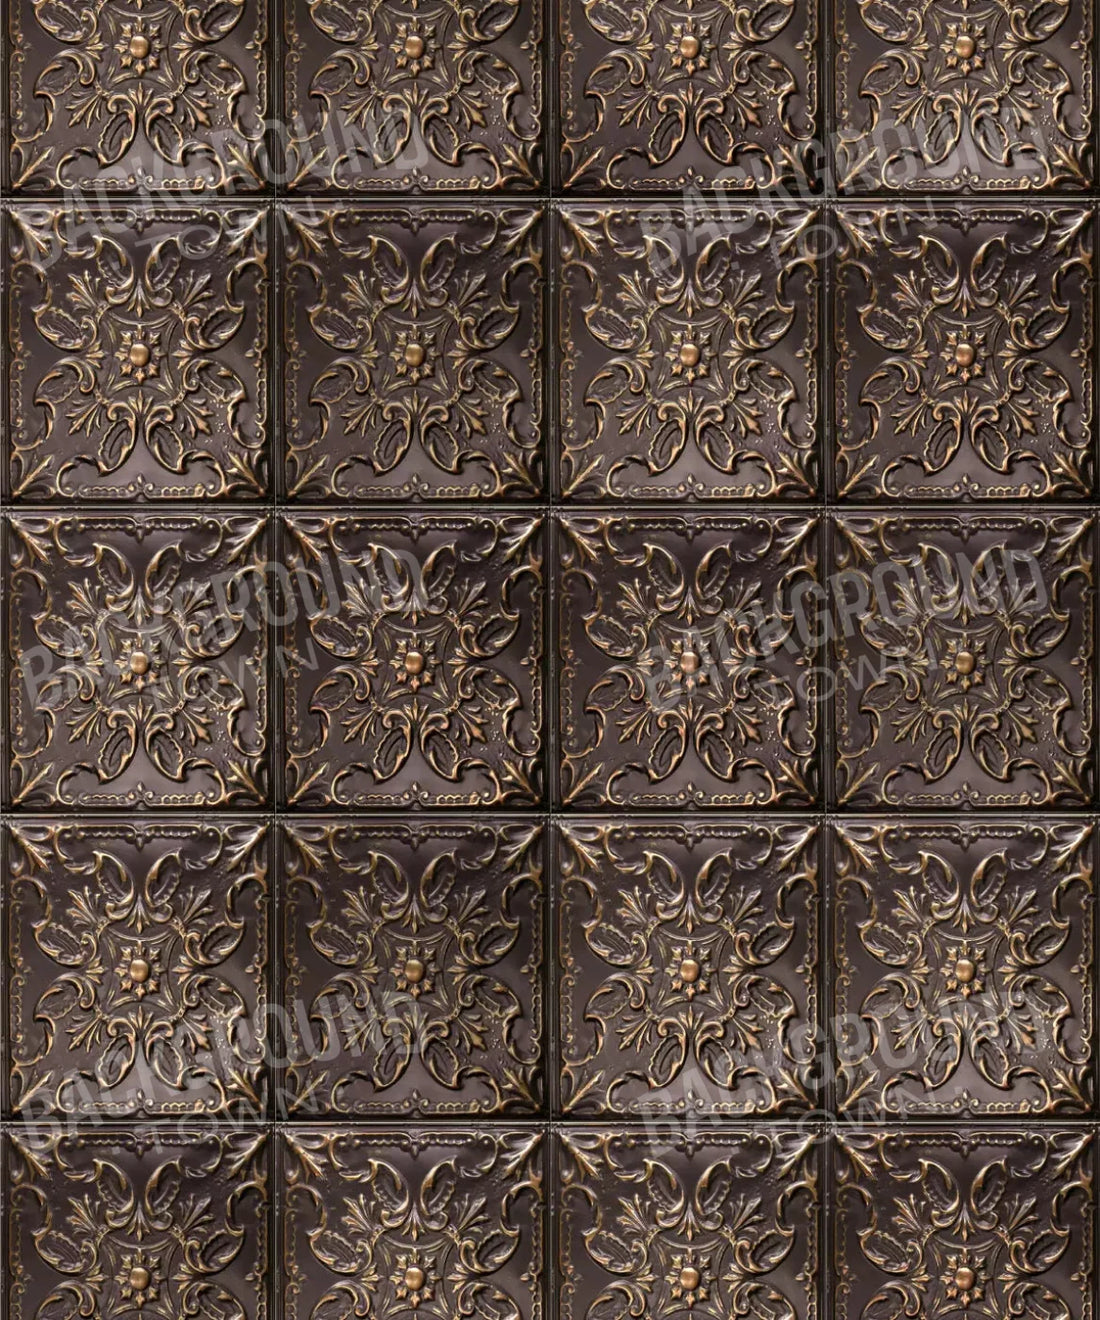 Bronze Metal Tile Backdrop for Photography